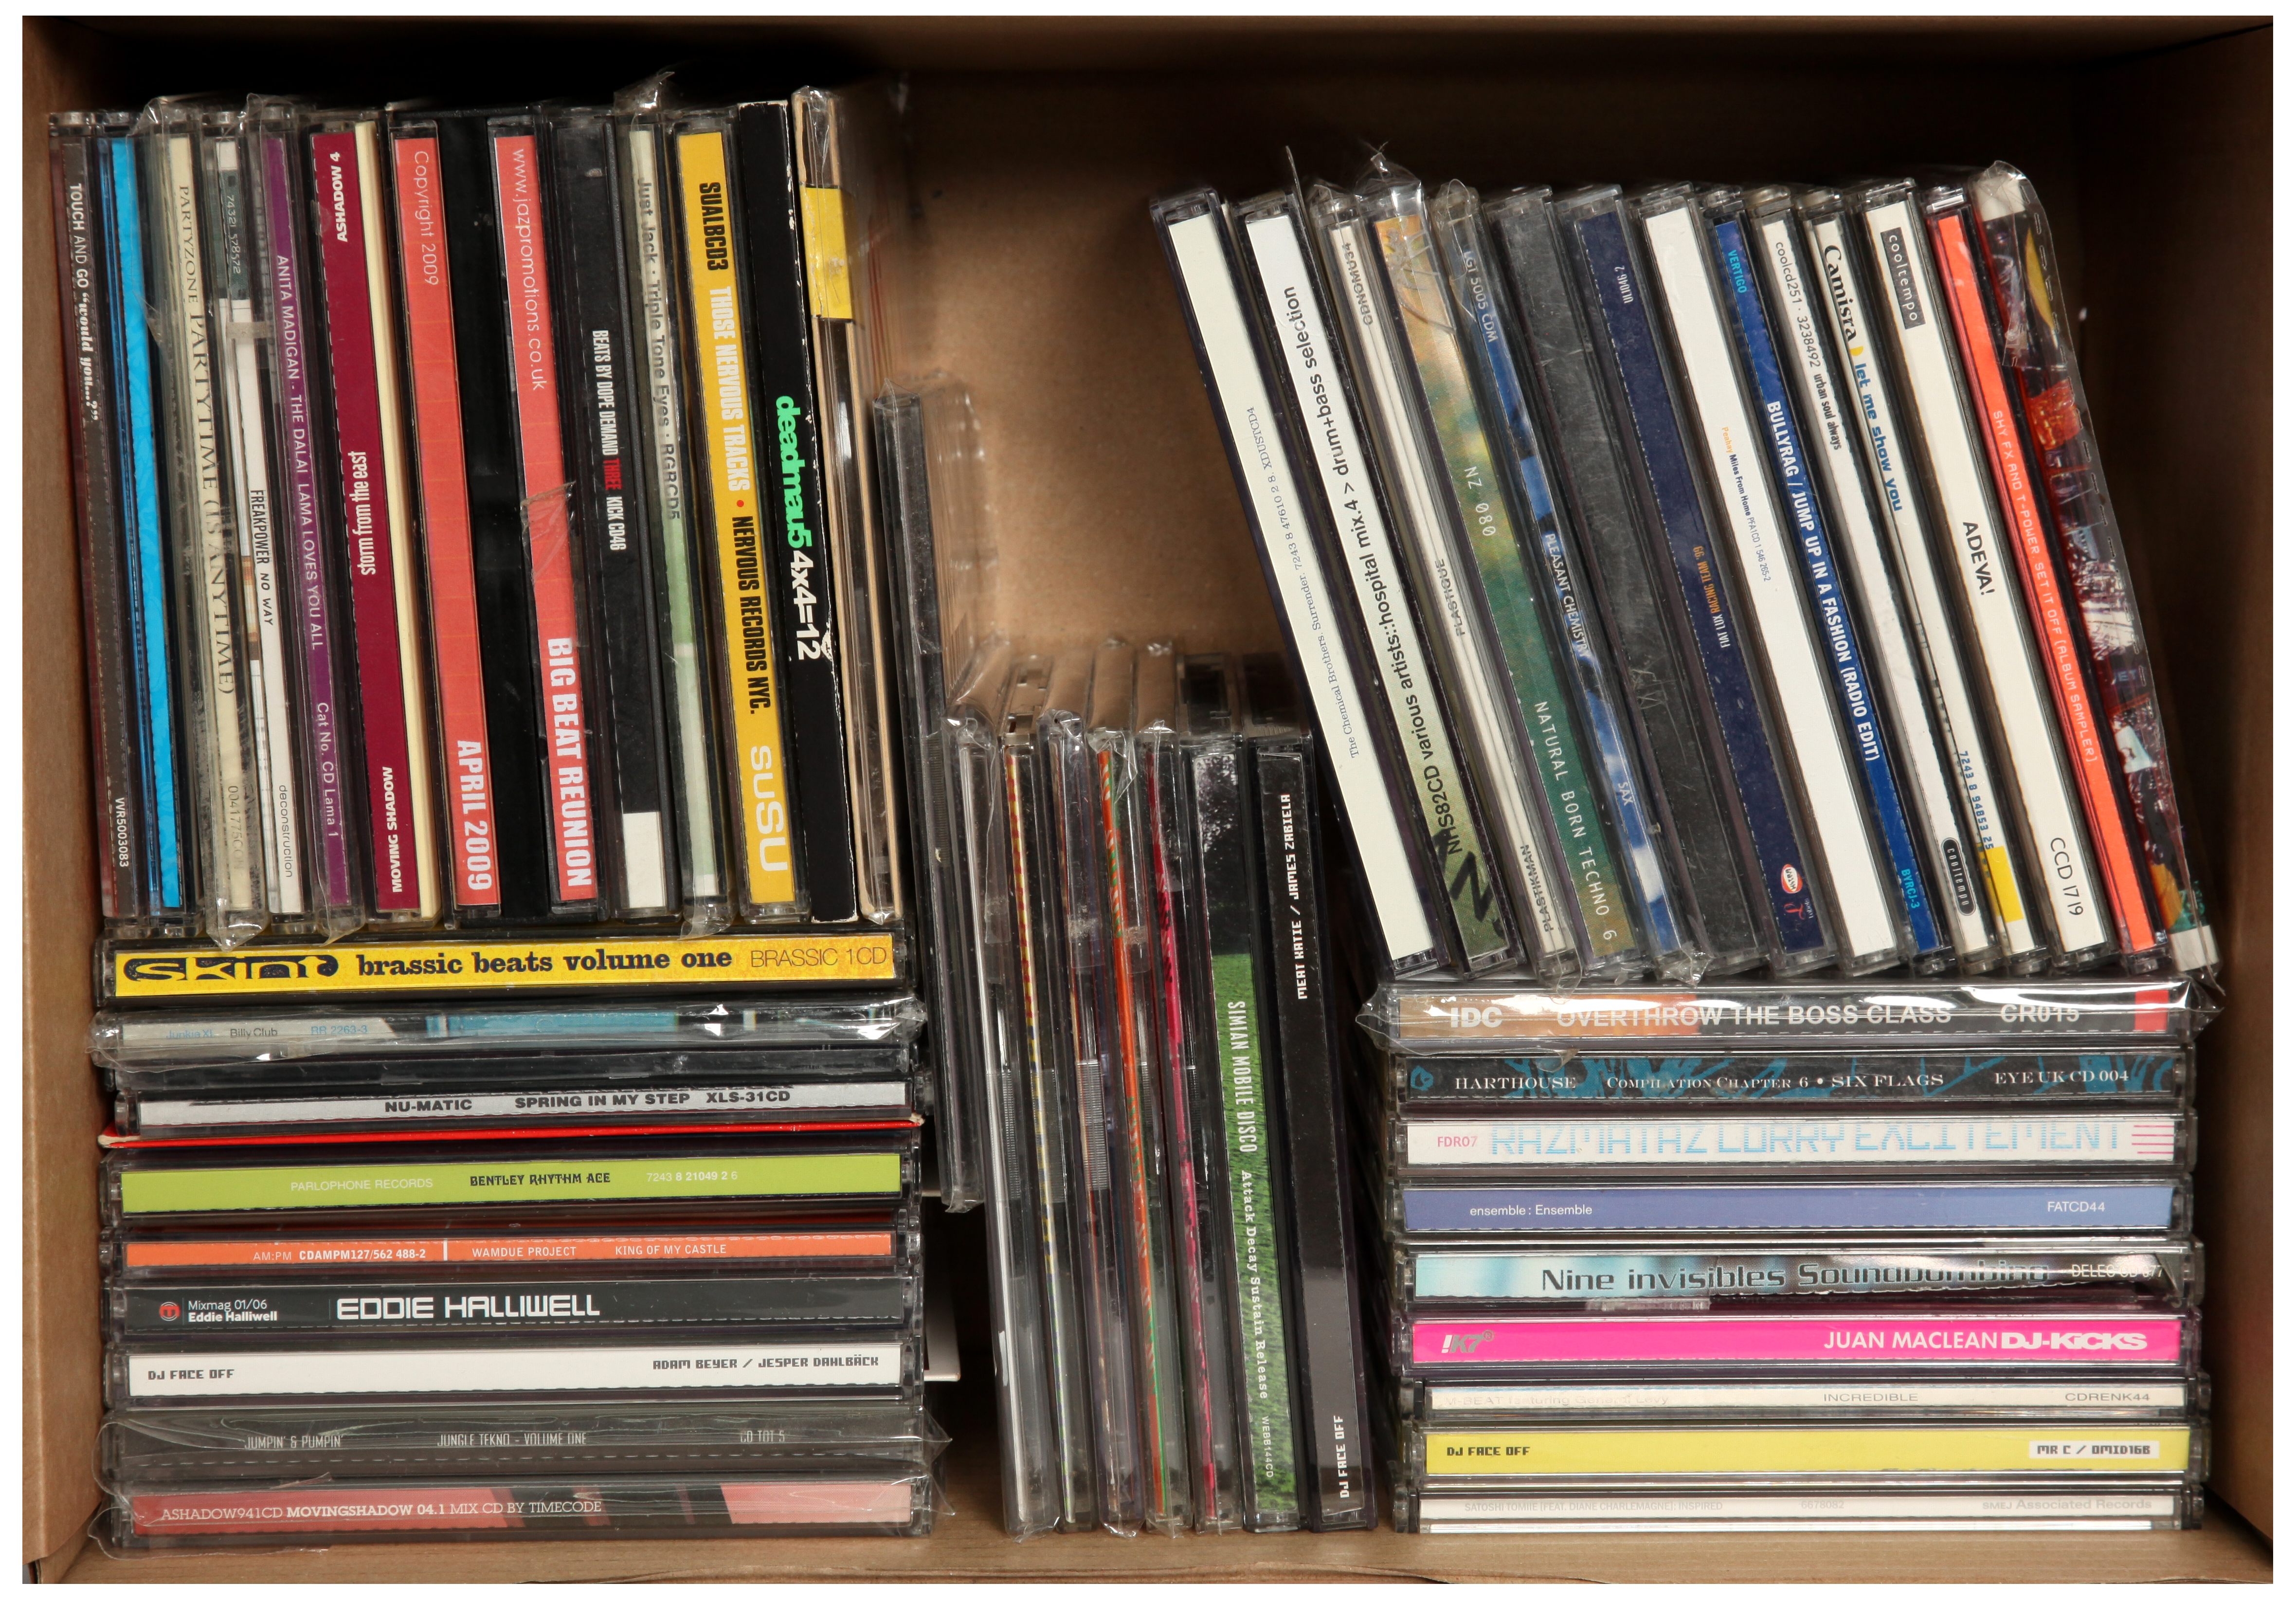 Dance, Breakbeat and Techno CD Albums and CD singles